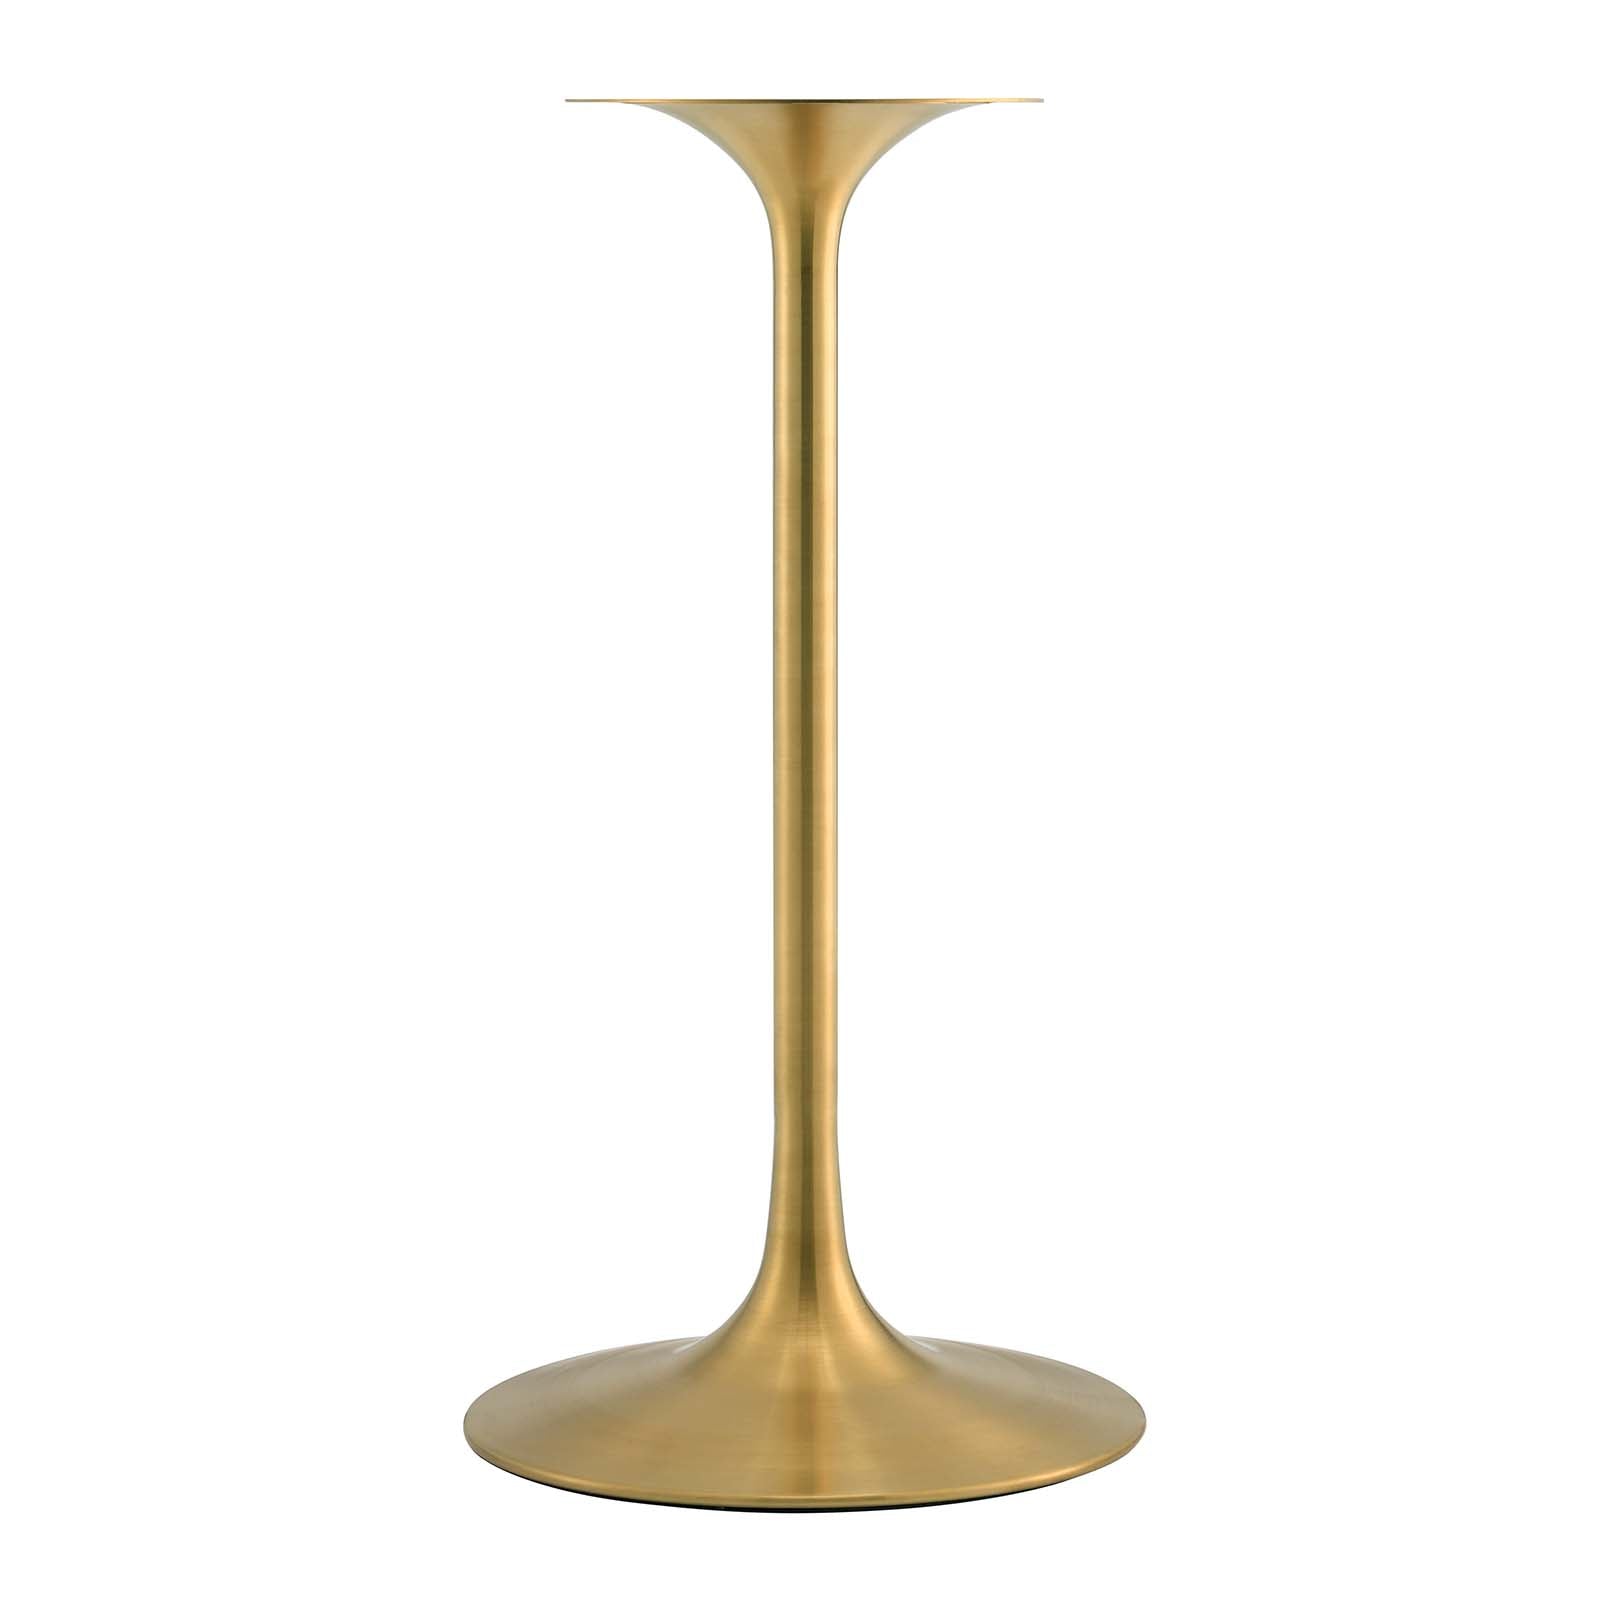 Modway Bar Tables - Lippa 28" Square Wood Top Bar Table Gold And White